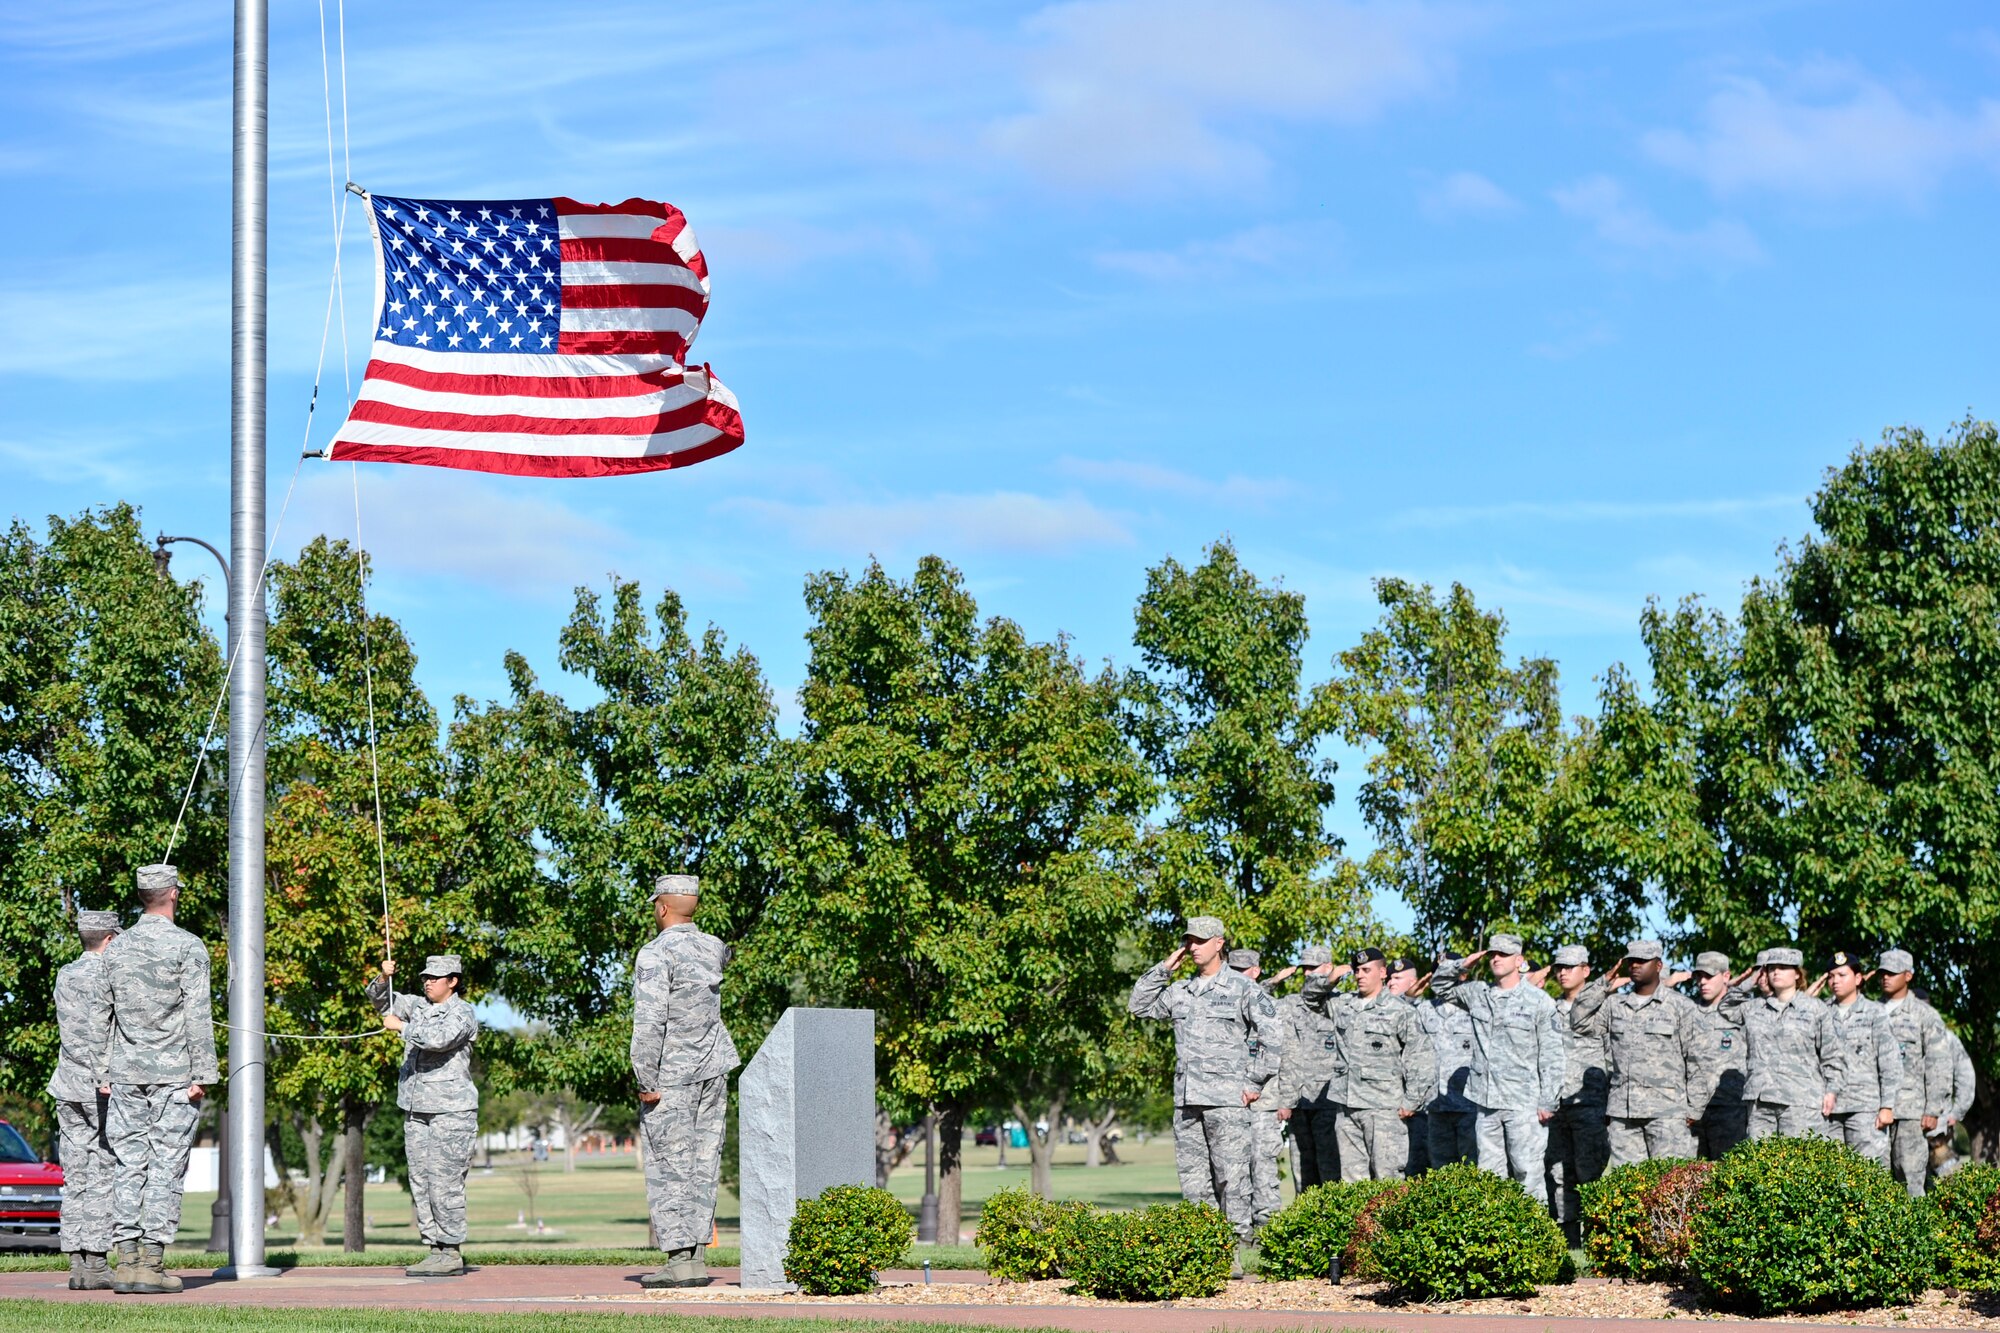 Airmen lower the American Flag during a Patriot Day ceremony Sept. 11, 2014, at McConnell Air Force Base, Kan. The ceremony was held in honor of the nearly 3,000 people who died during the 9/11 attacks. (U.S. Air Force photo/Airman 1st Class John Linzmeier)